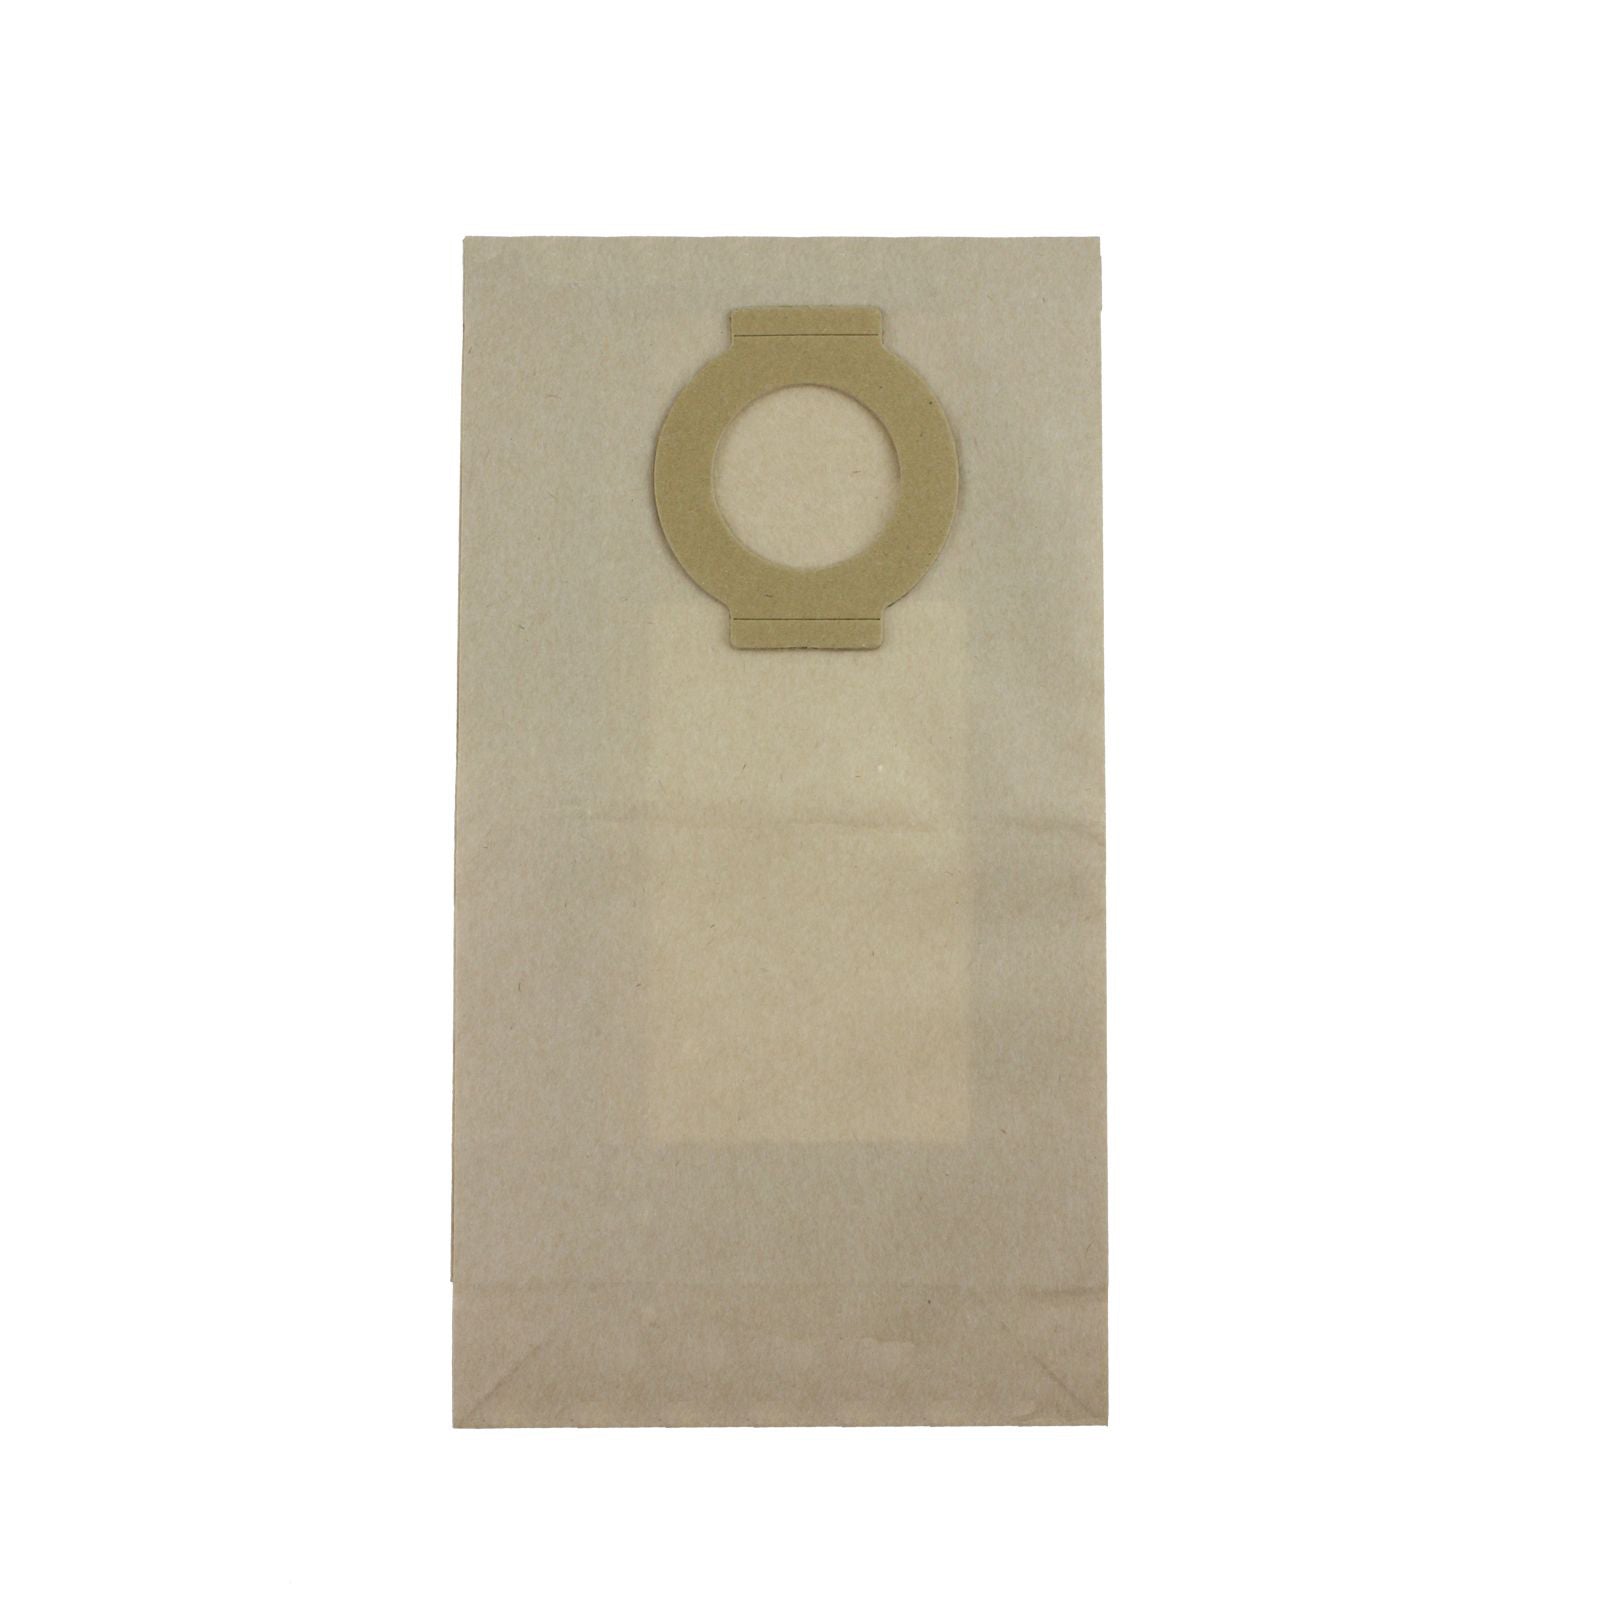 Vacuum Cleaner Dust Bags (Pack of 5 + 5 Fresheners) compatible with Hoover vacuum cleaner